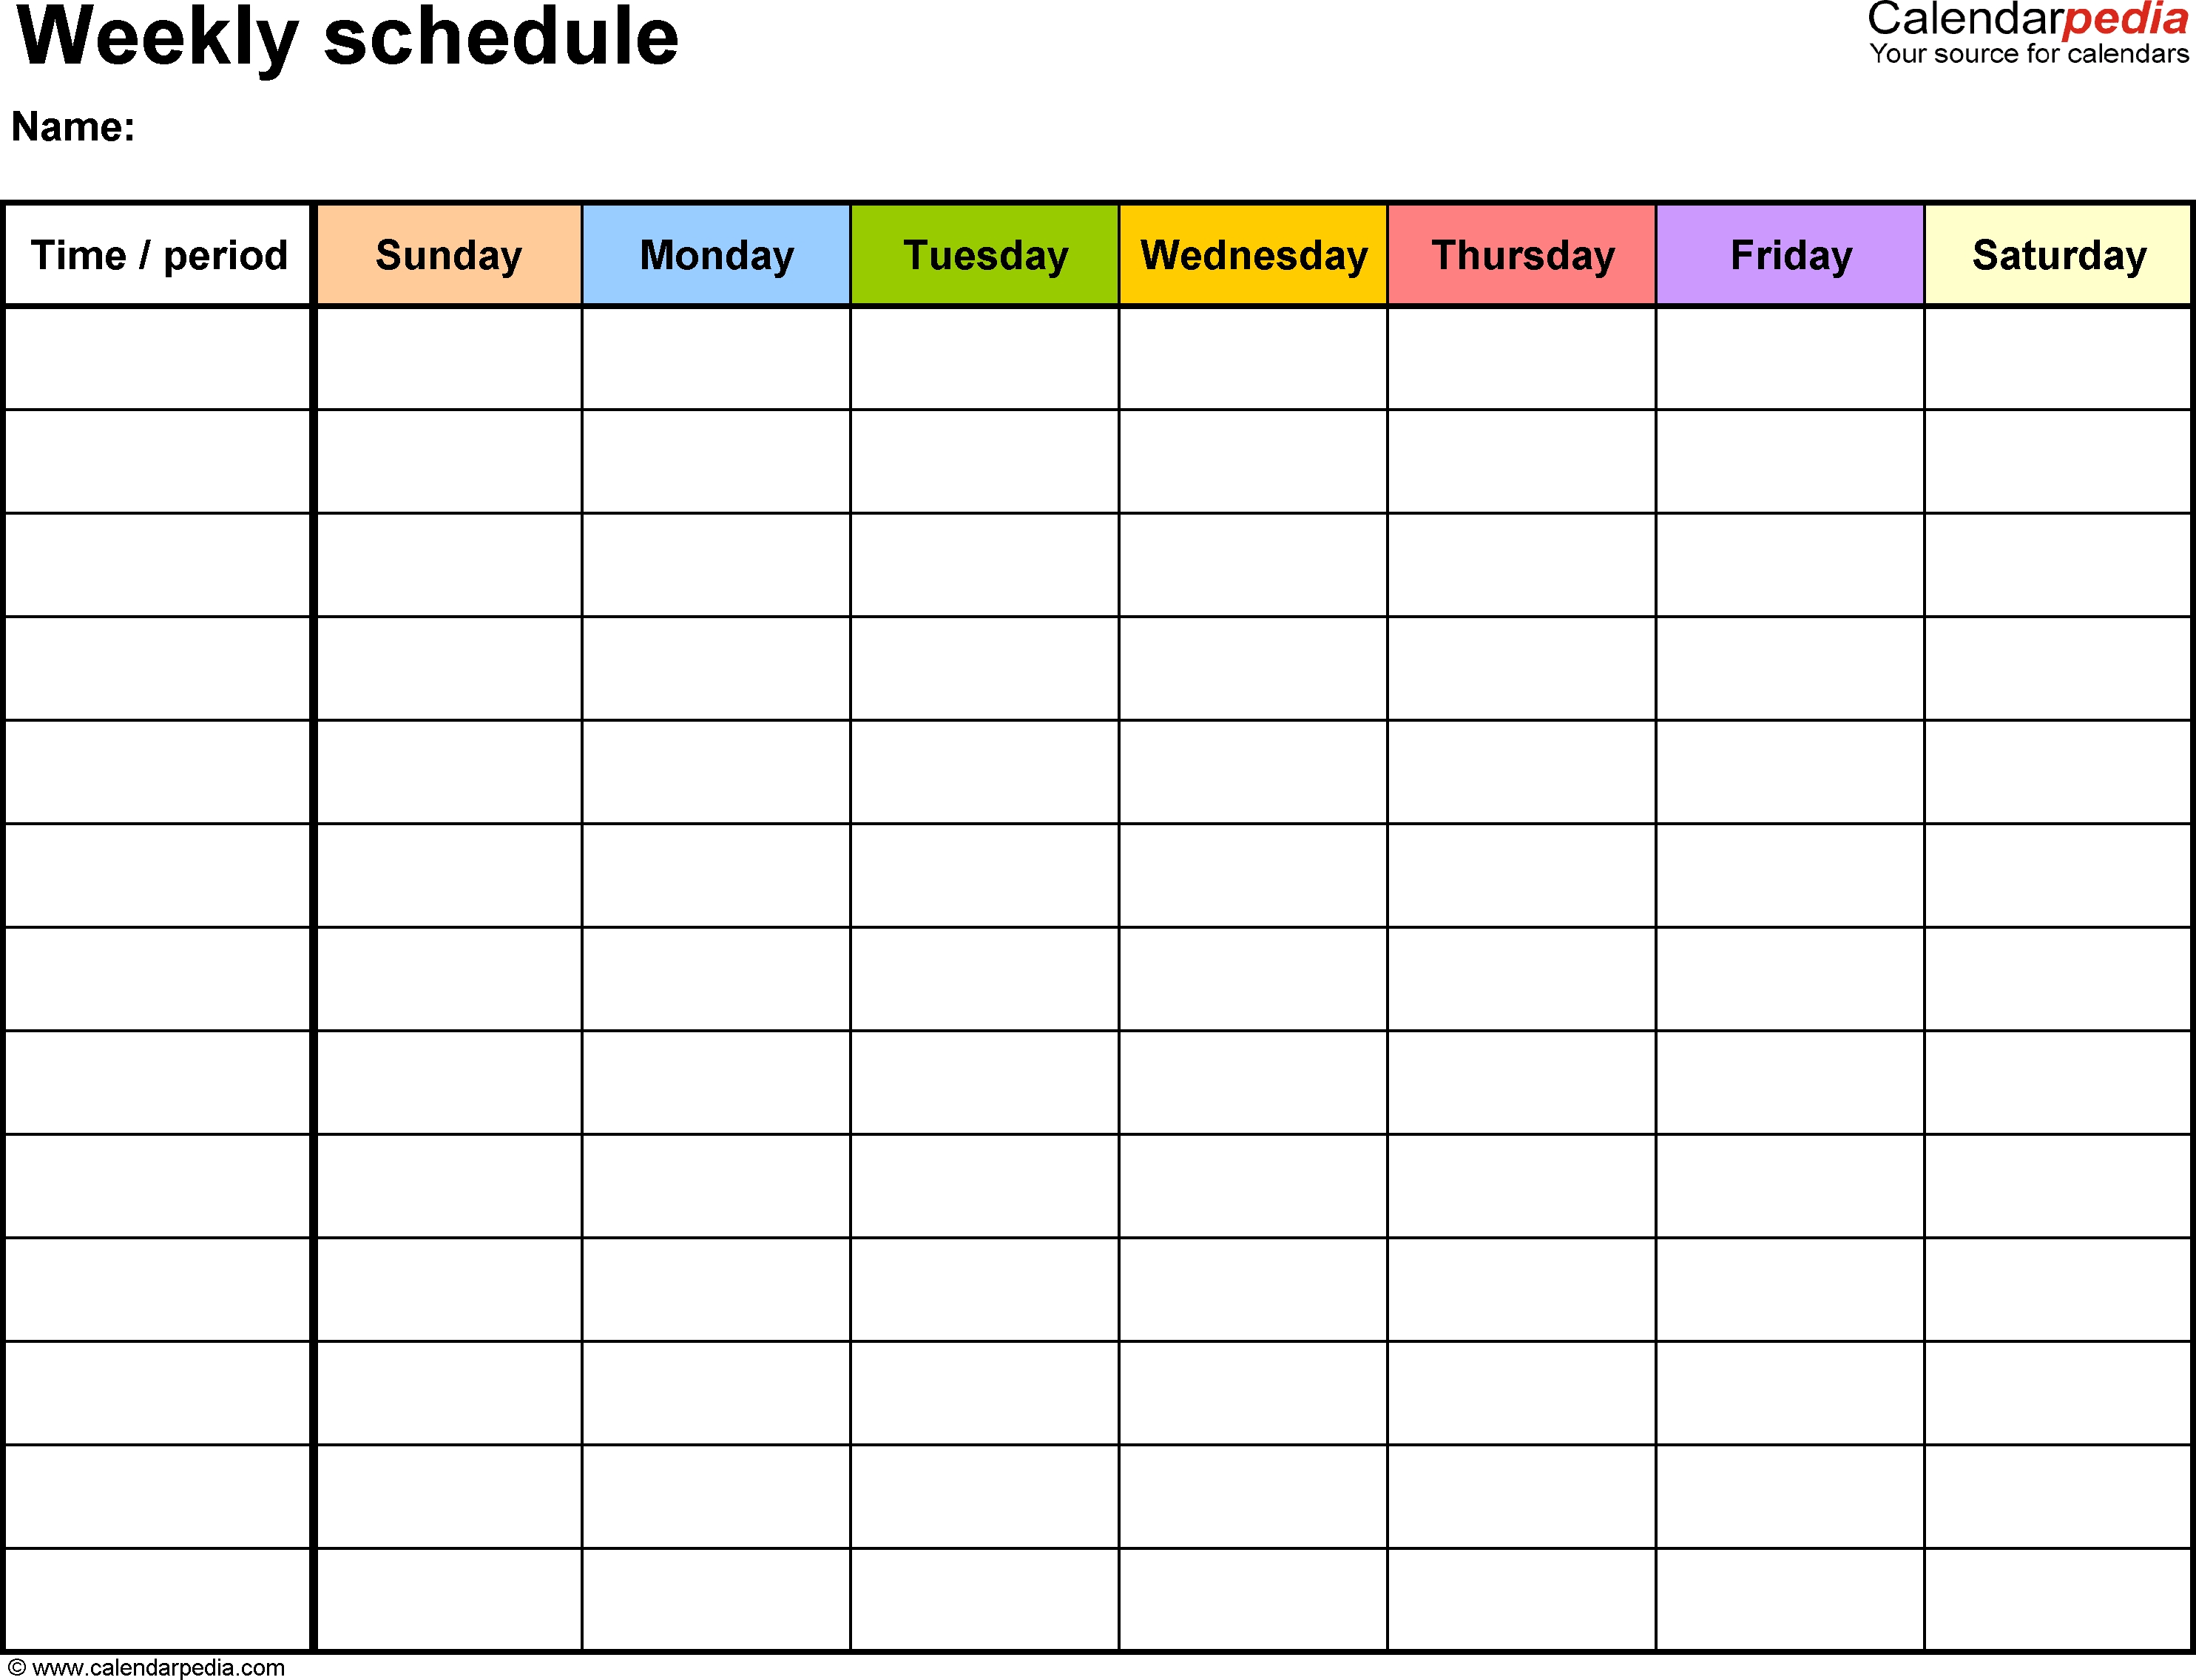 Free Weekly Schedule Templates For Word - 18 Templates with Free Online Printable Weekly Calendar